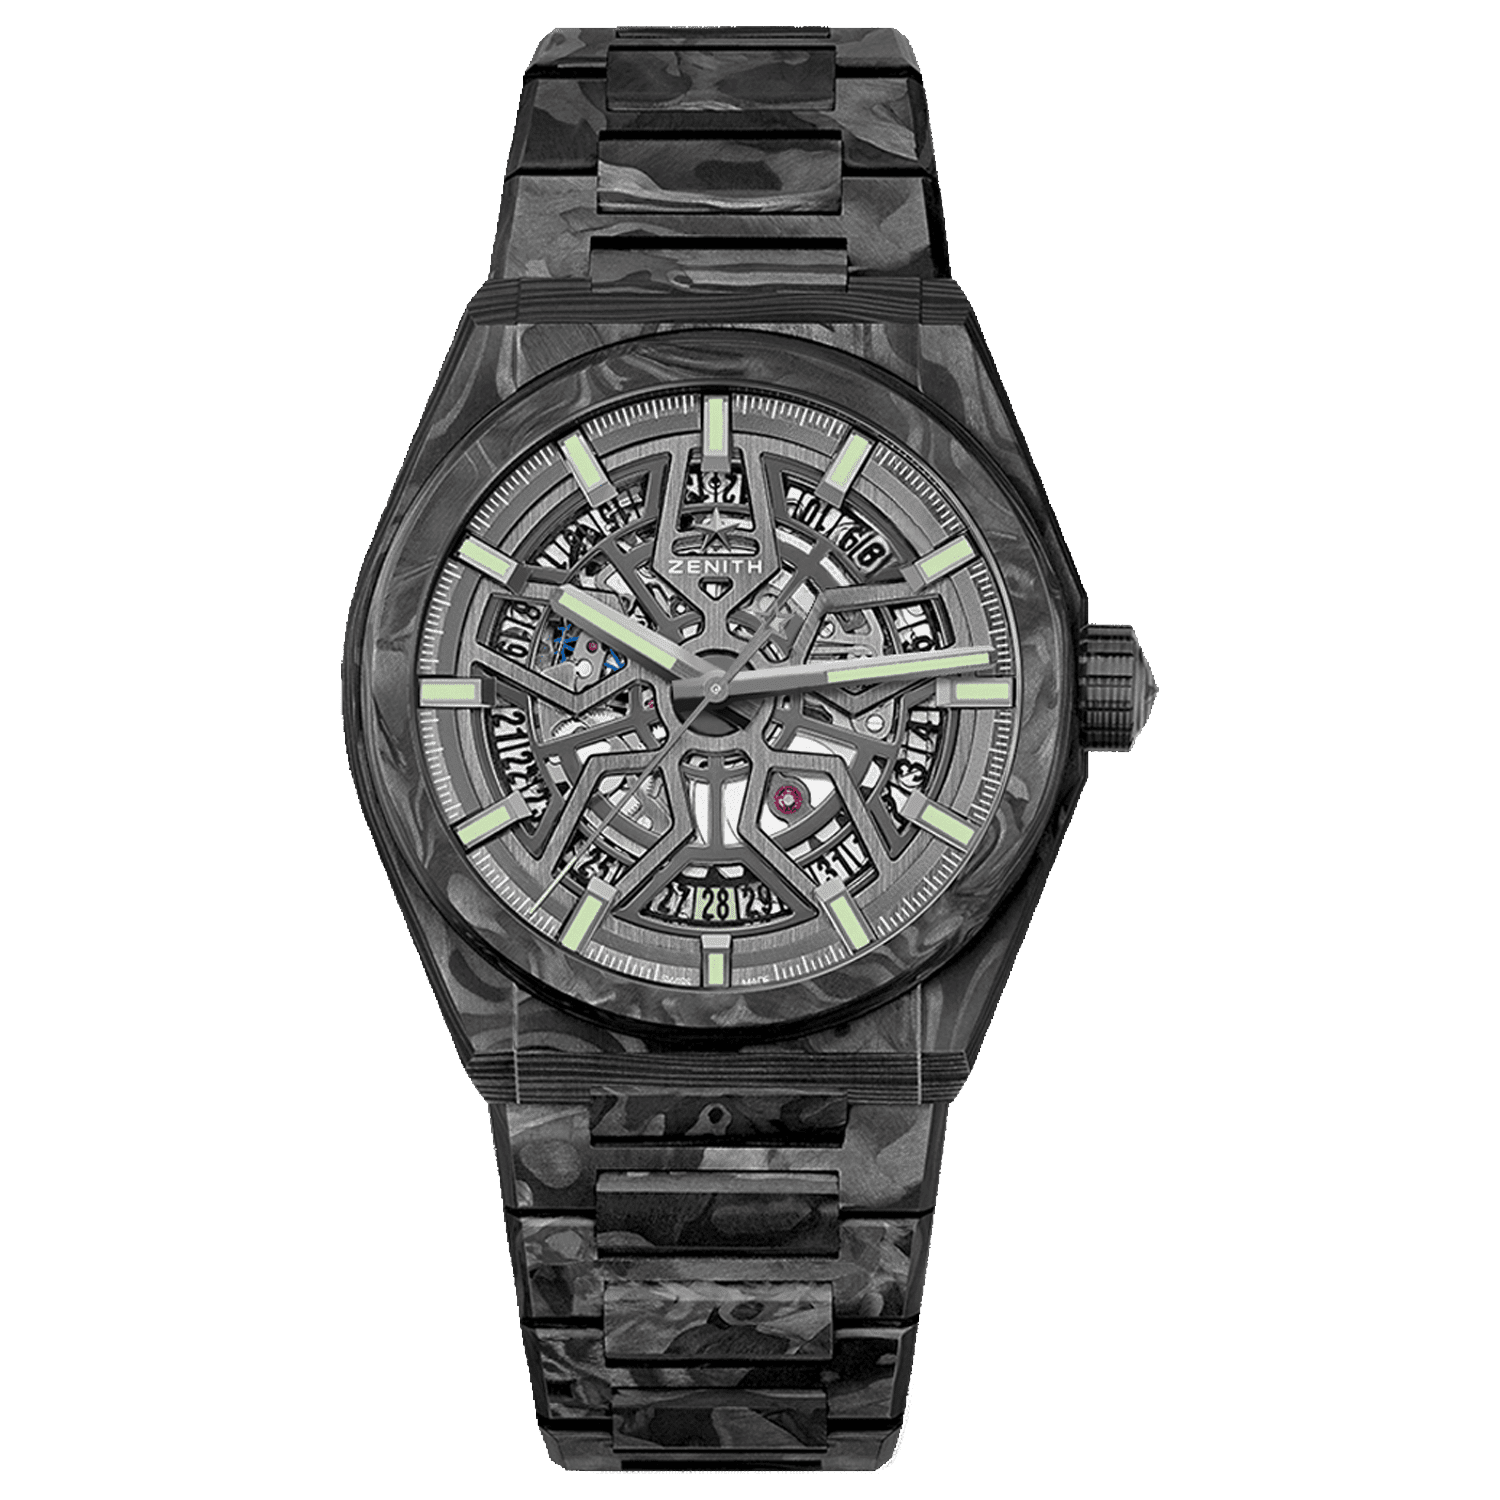 2021 ZENITH DEFY CLASSIC BLACK & WHITE EDITION for sale in London